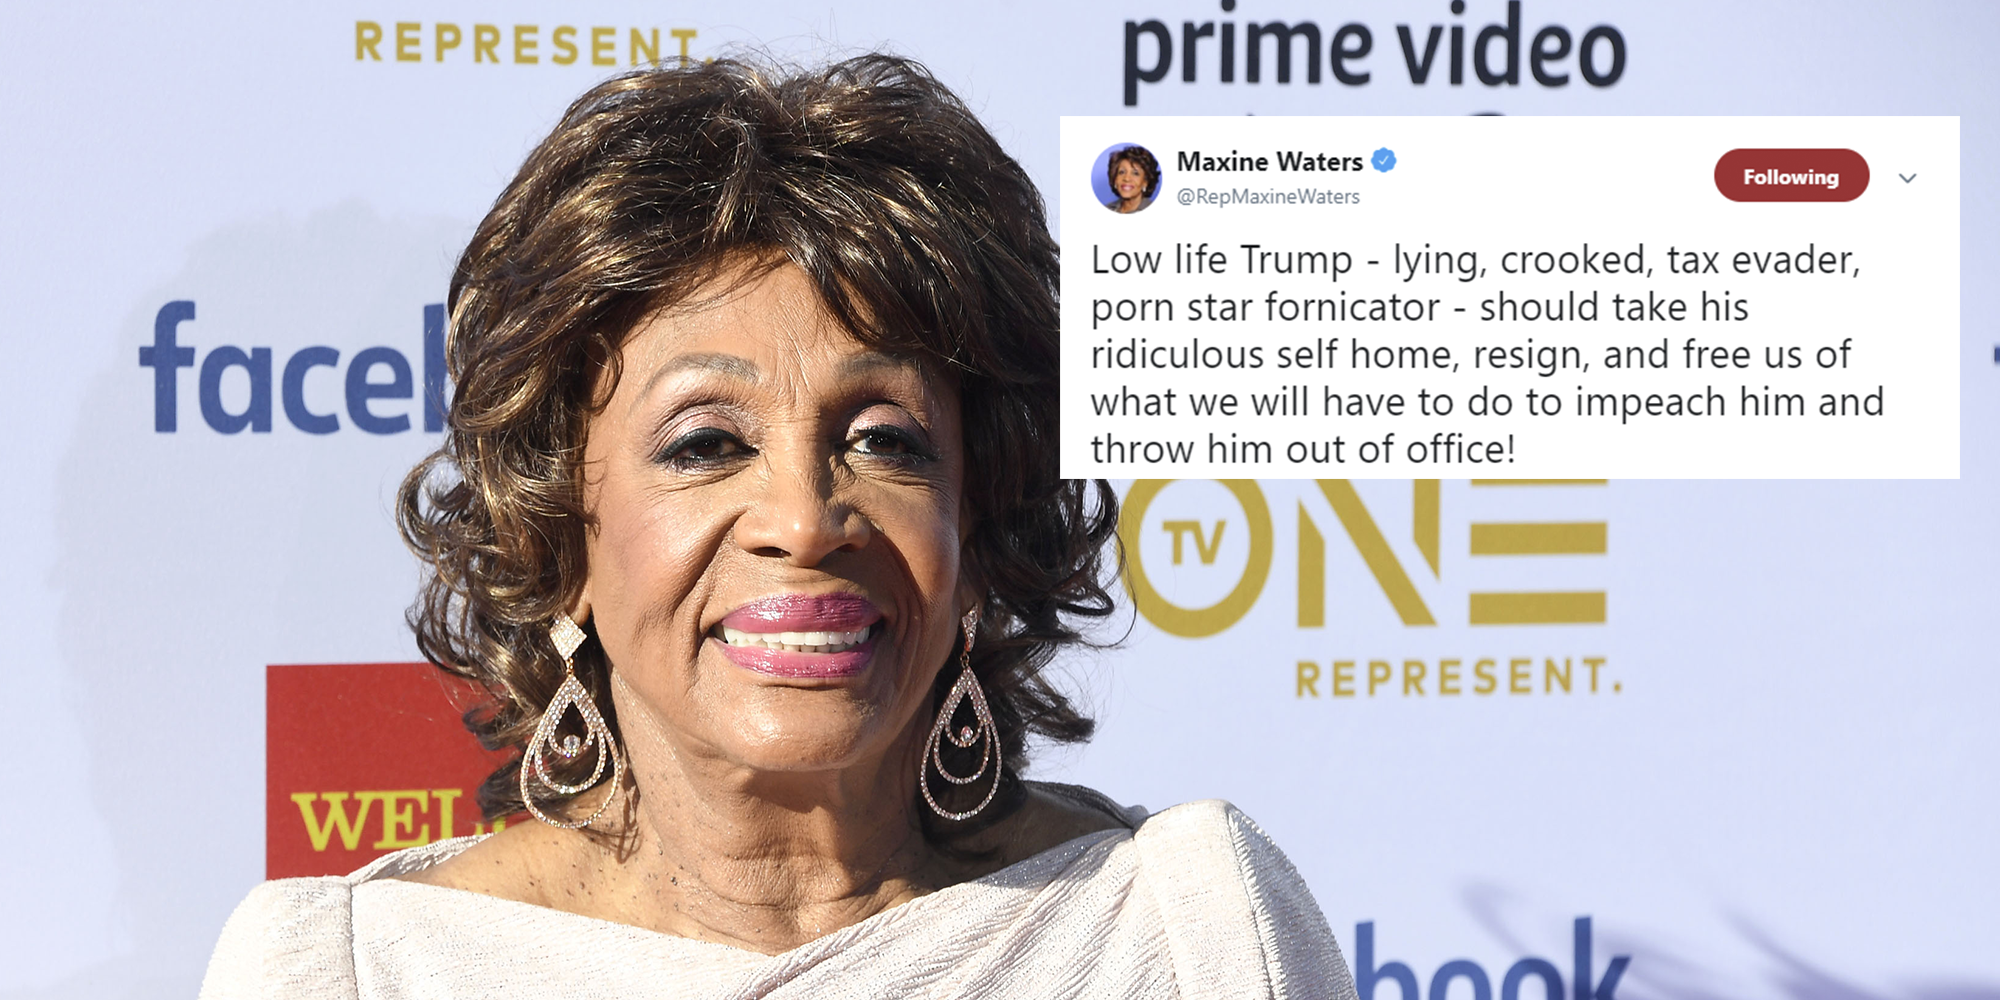 British Former Porn Star - Maxine Waters brands Trump 'porn star fornicator' and calls ...